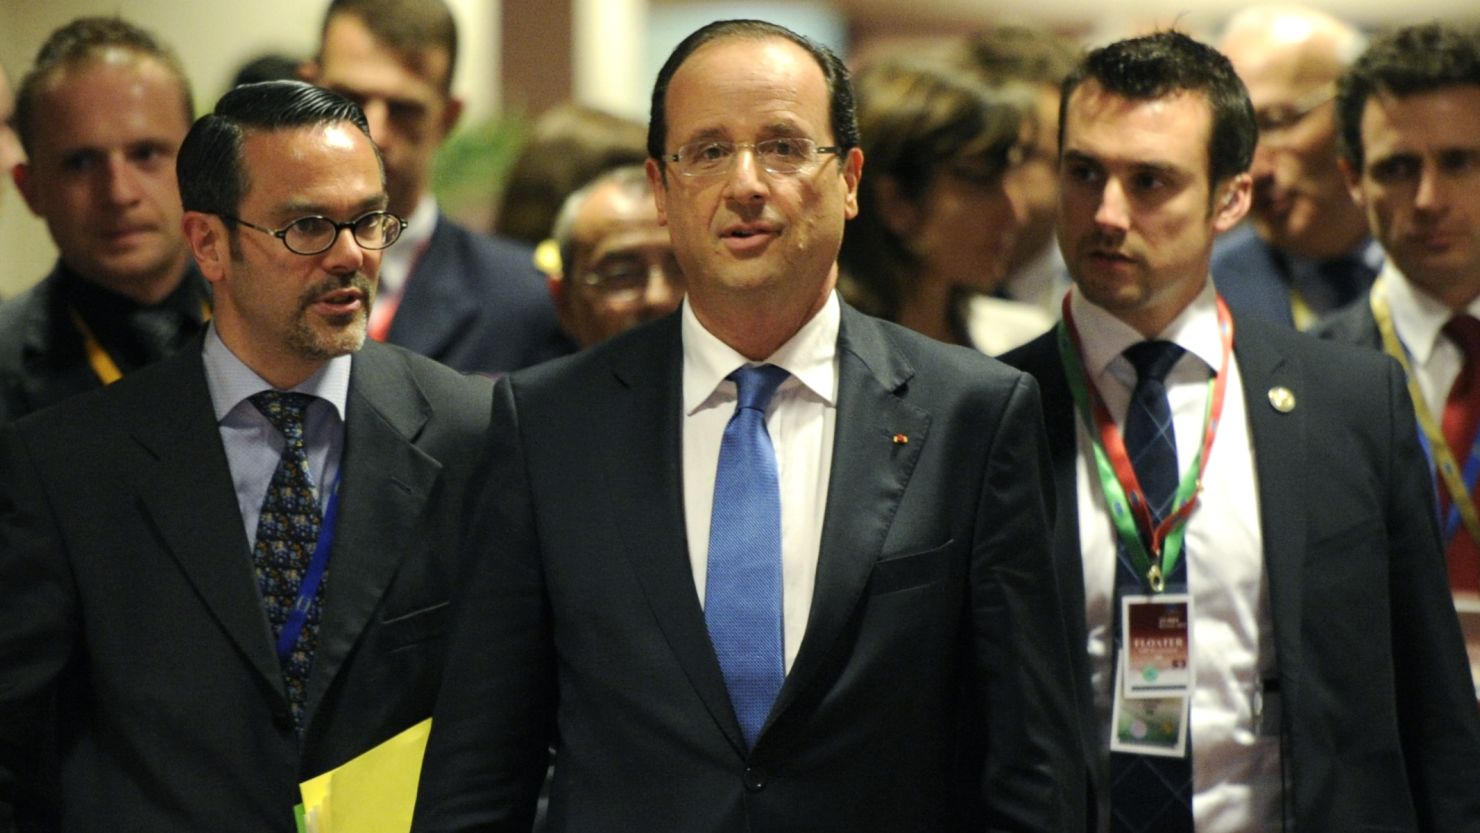 French President Francois Hollande arrives for a press conference in Brussels on May 24, 2012. 